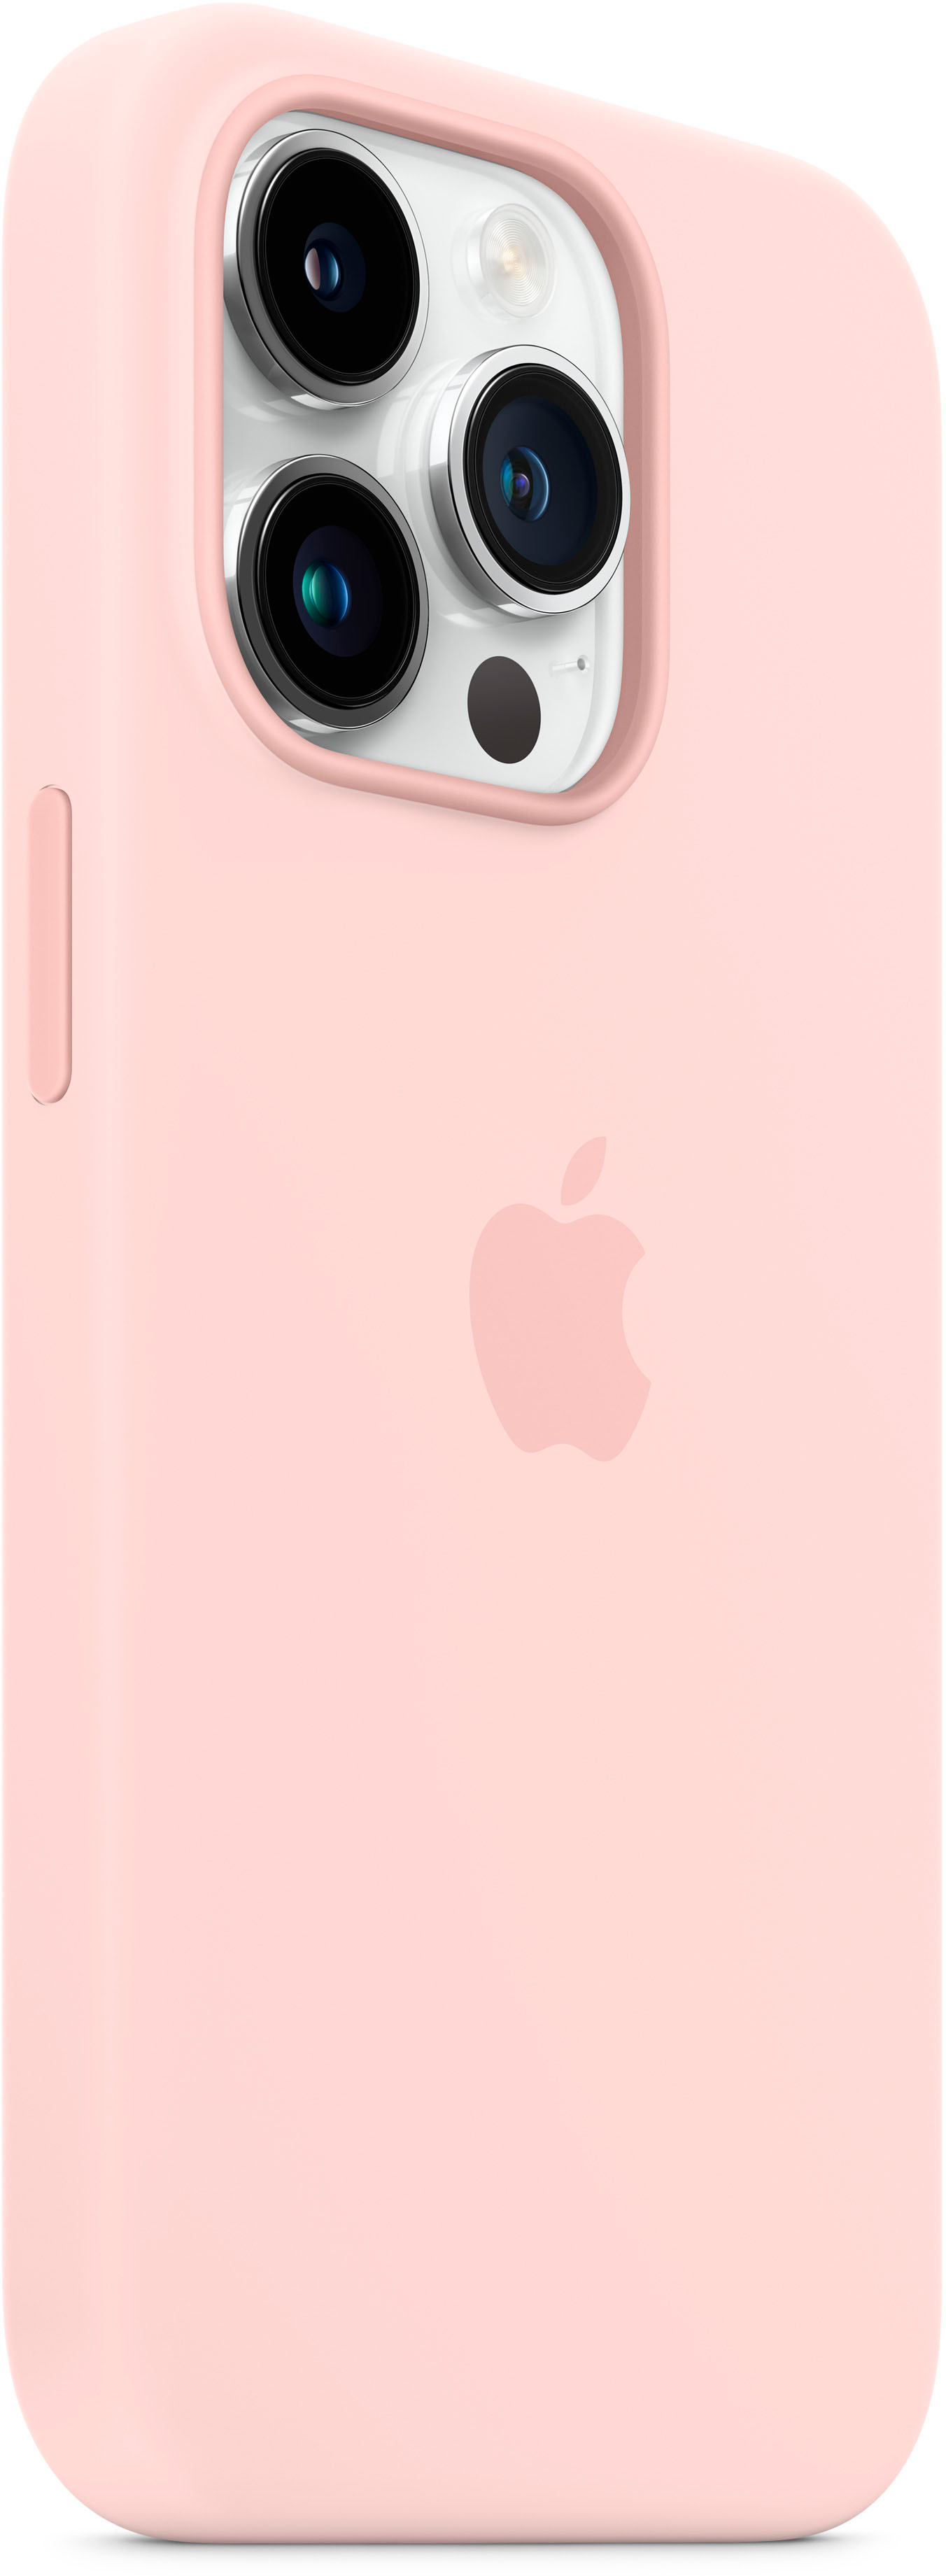 Kiq Square TPU Series Cute iPhone 14 Pro Max Case for Women Girls Compatible Apple iPhone 6.7 inch 2022 - Hot Pink